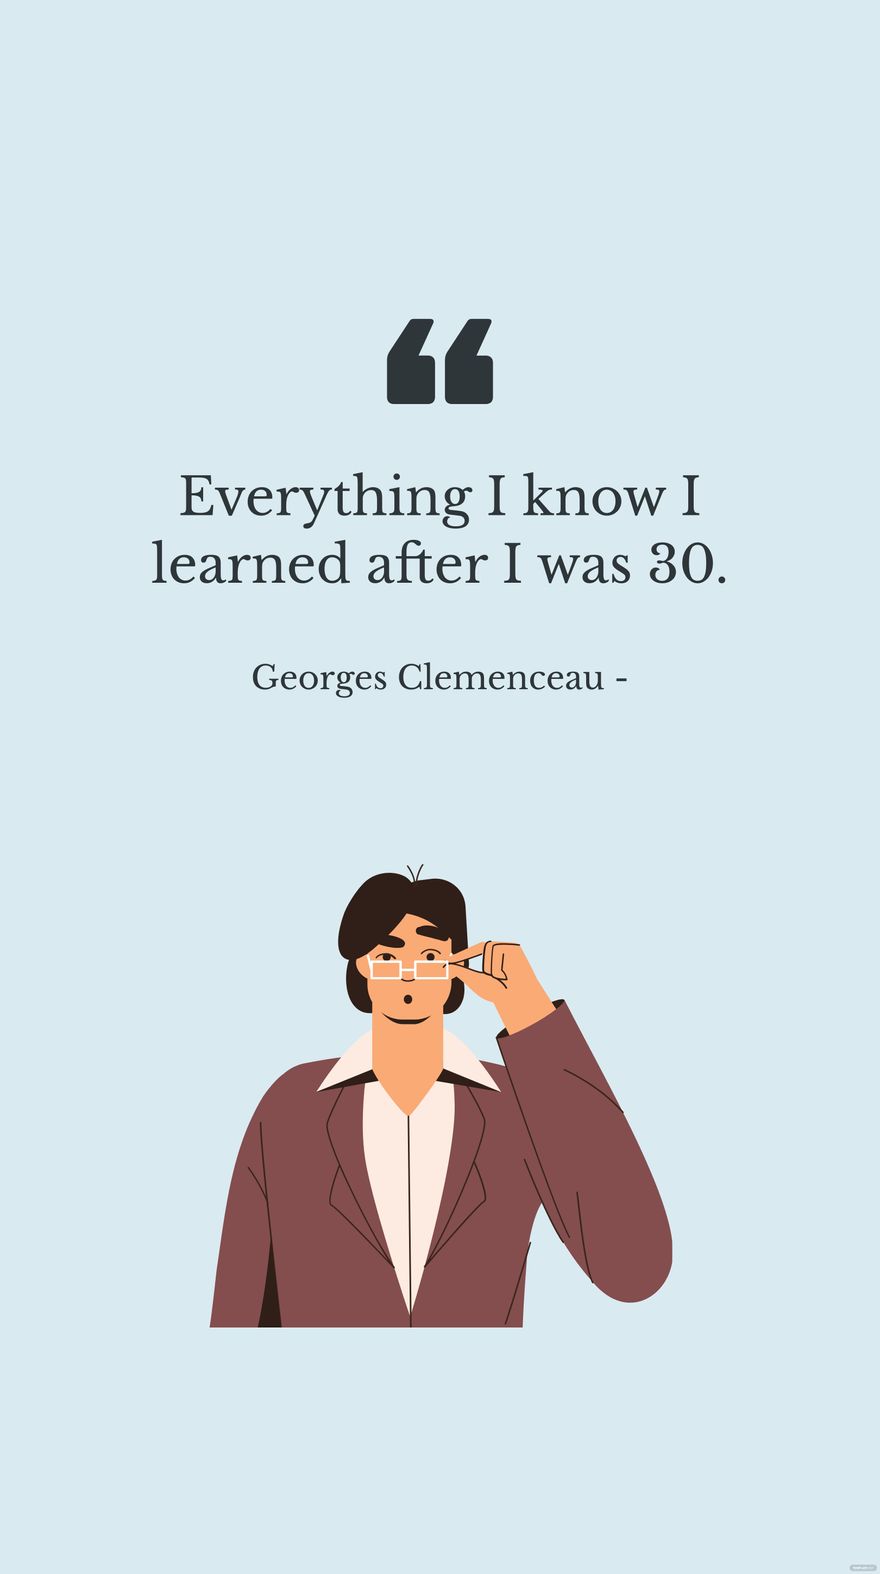 Georges Clemenceau - Everything I know I learned after I was 30. in JPG